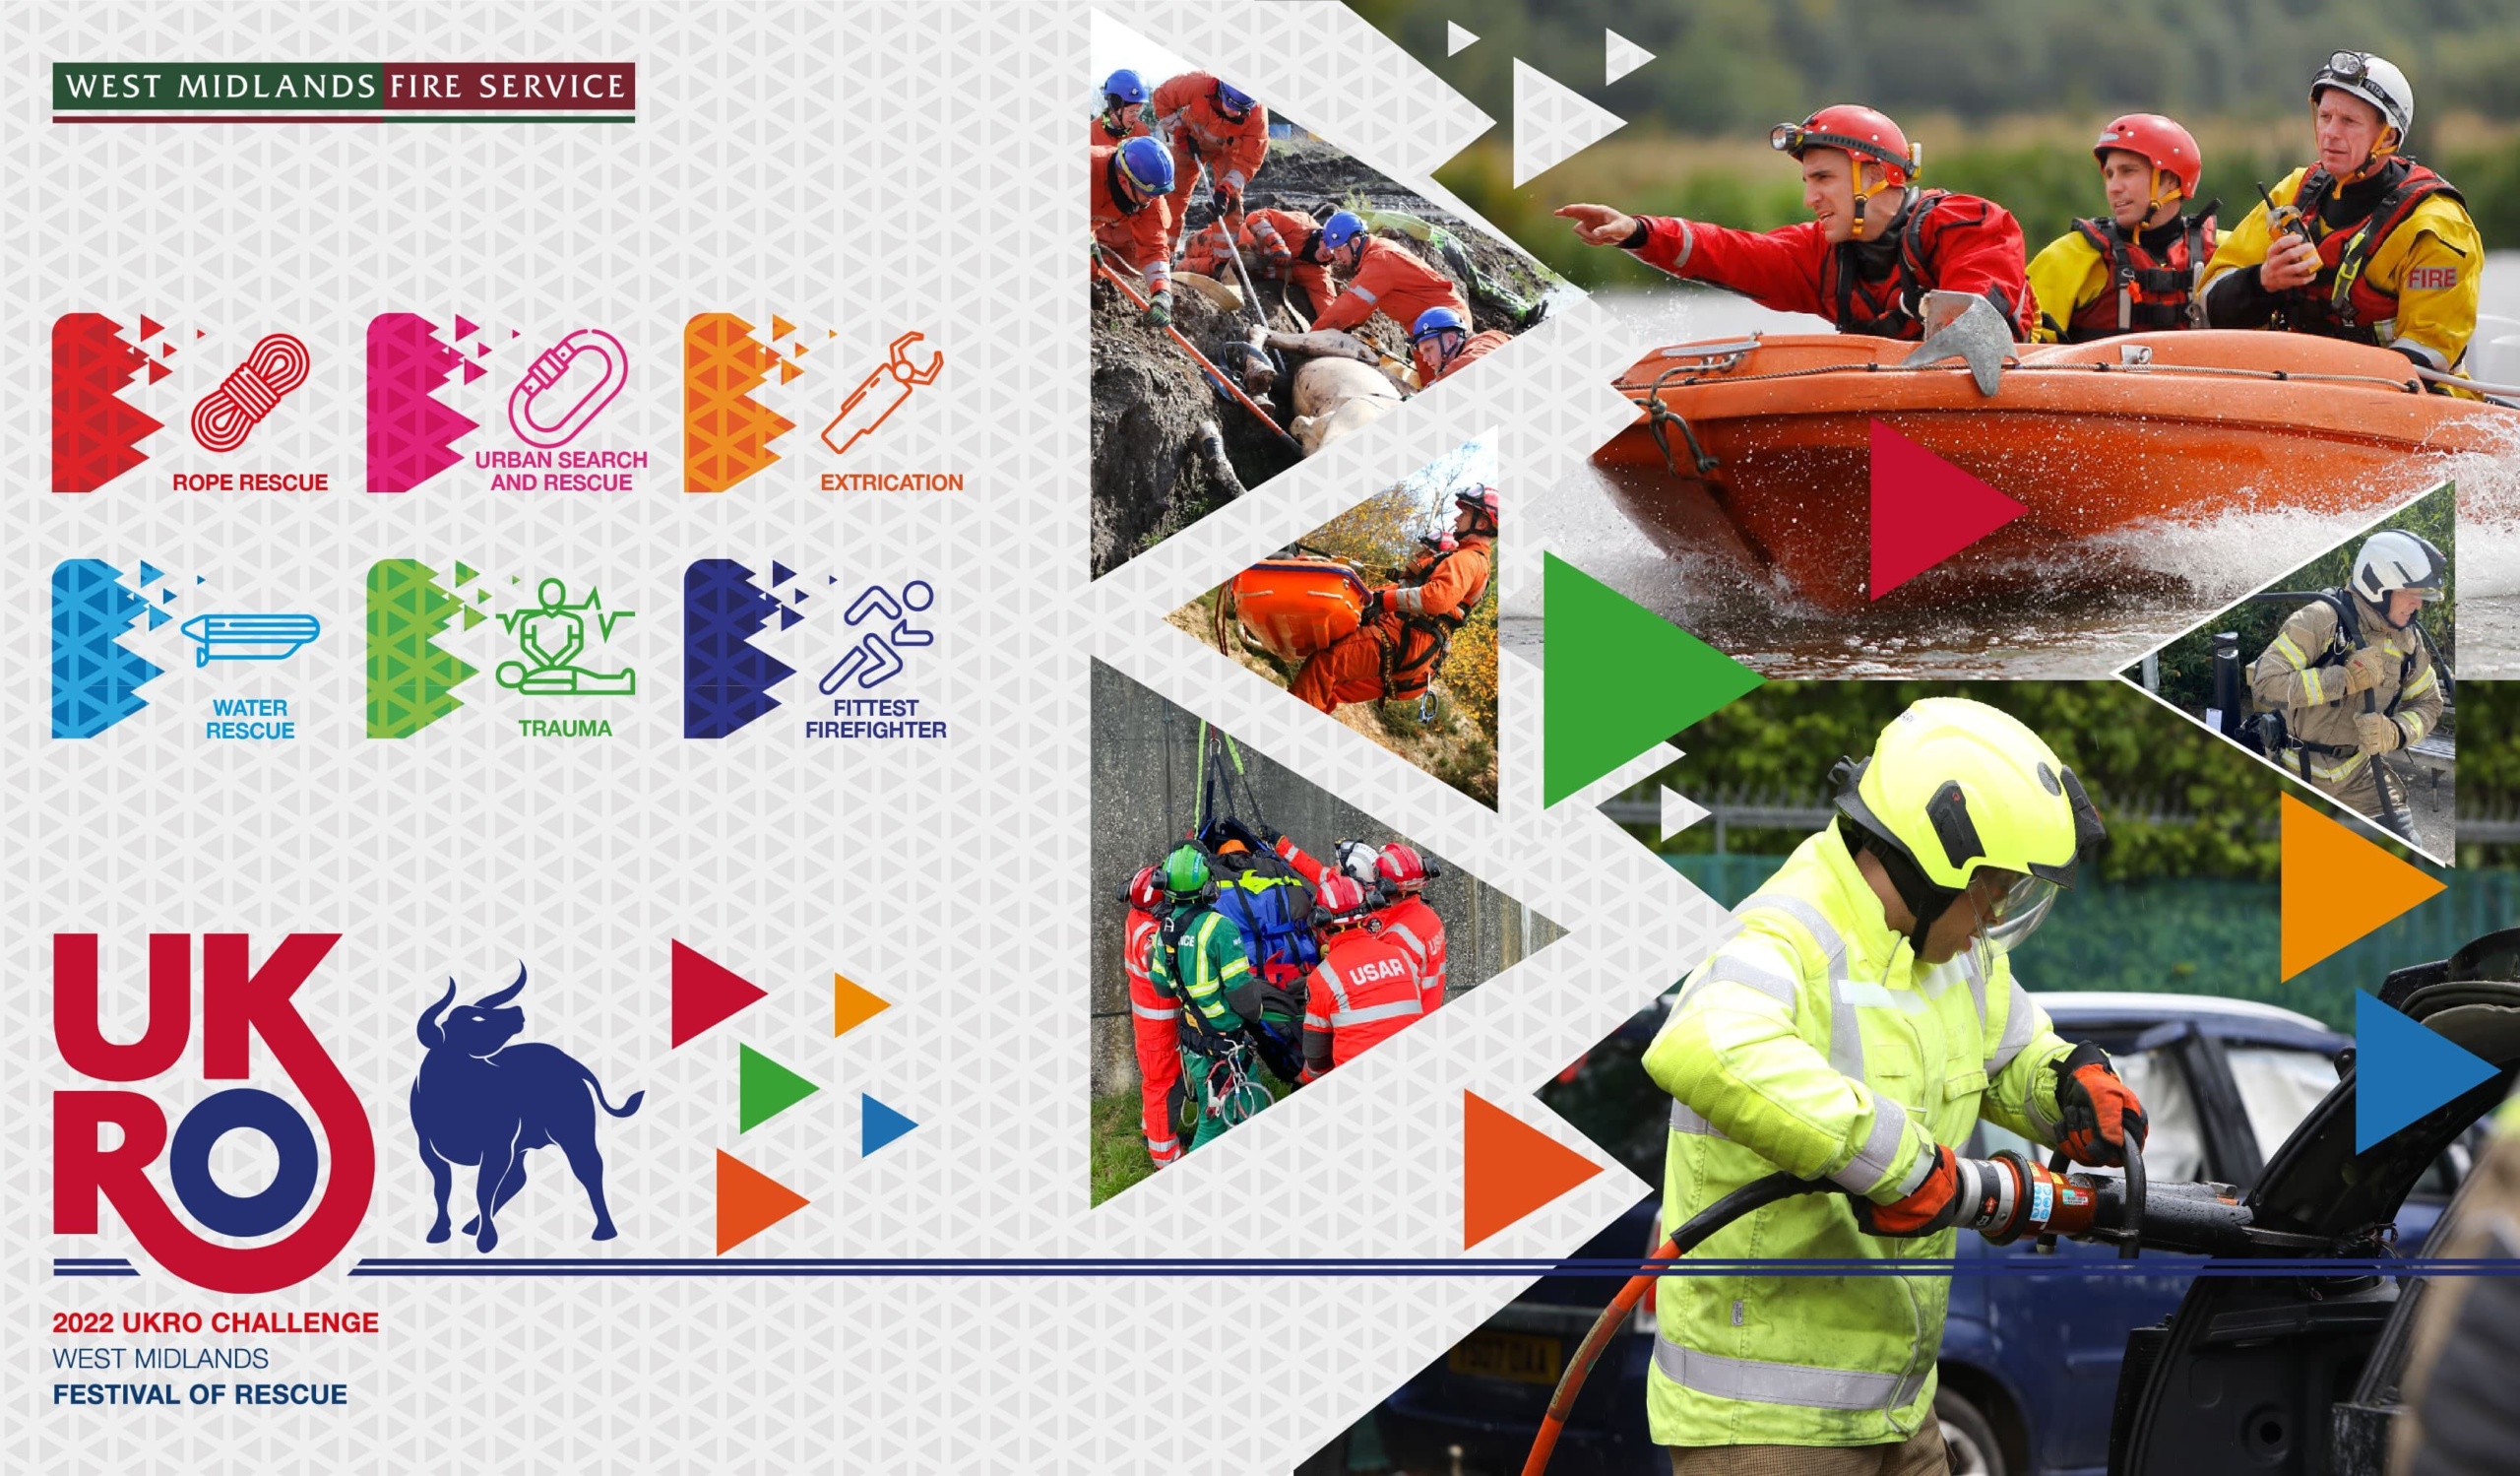 A montage of firefighters doing different rescue, water and extrication tasks with the UKRO logo and names of the 7 UKRO challenges.